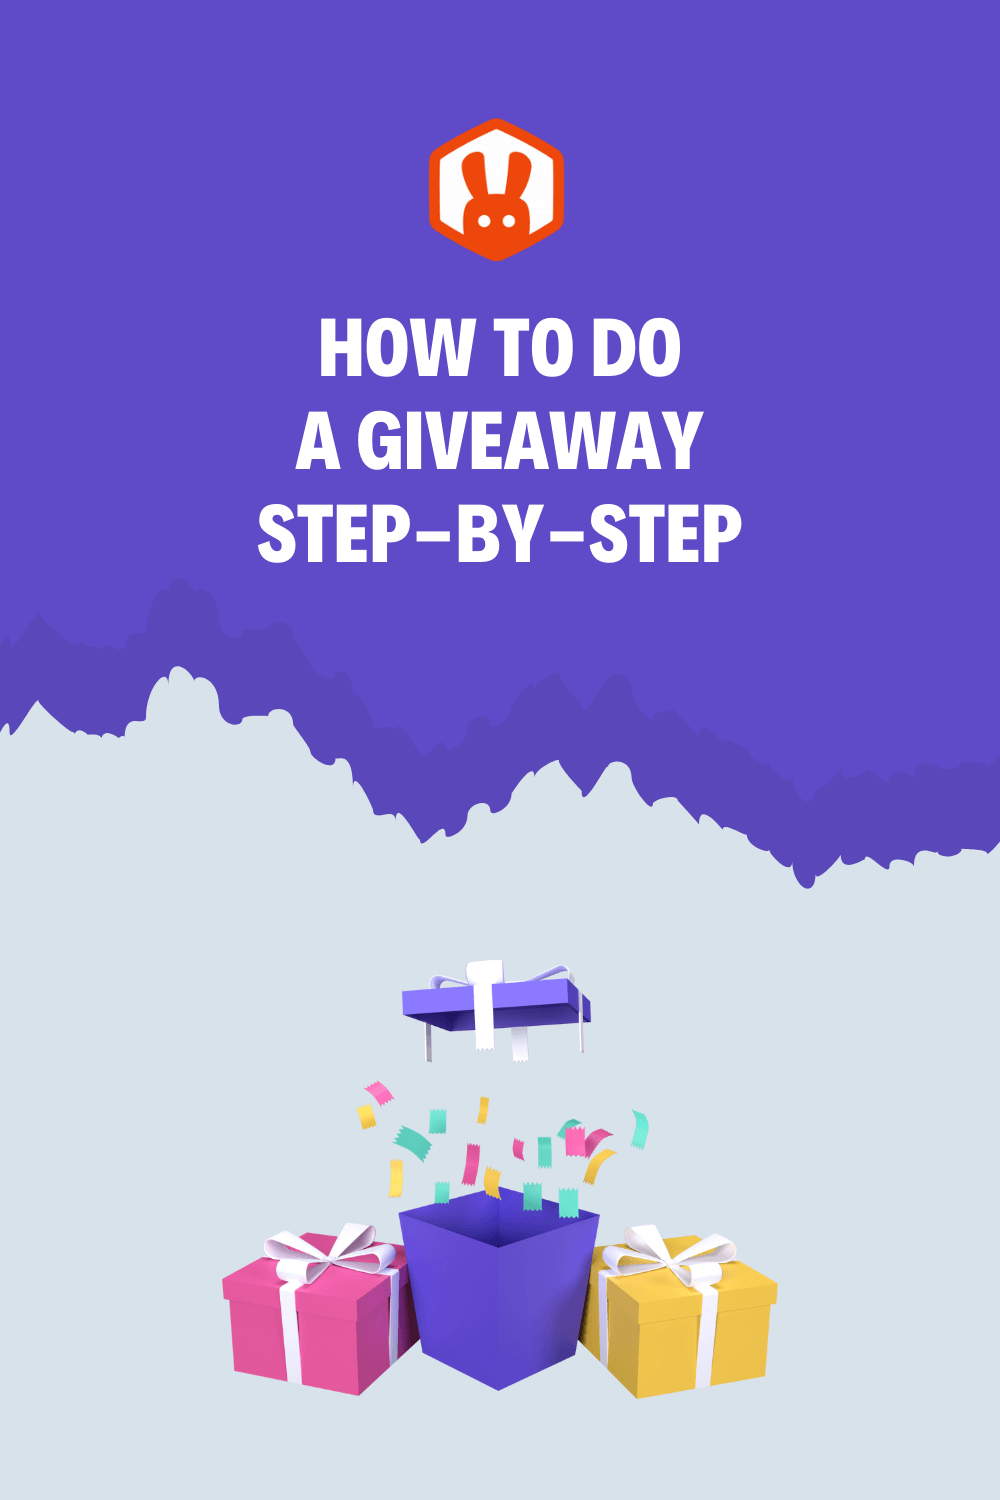 How to Make Your Giveaway Stand Out